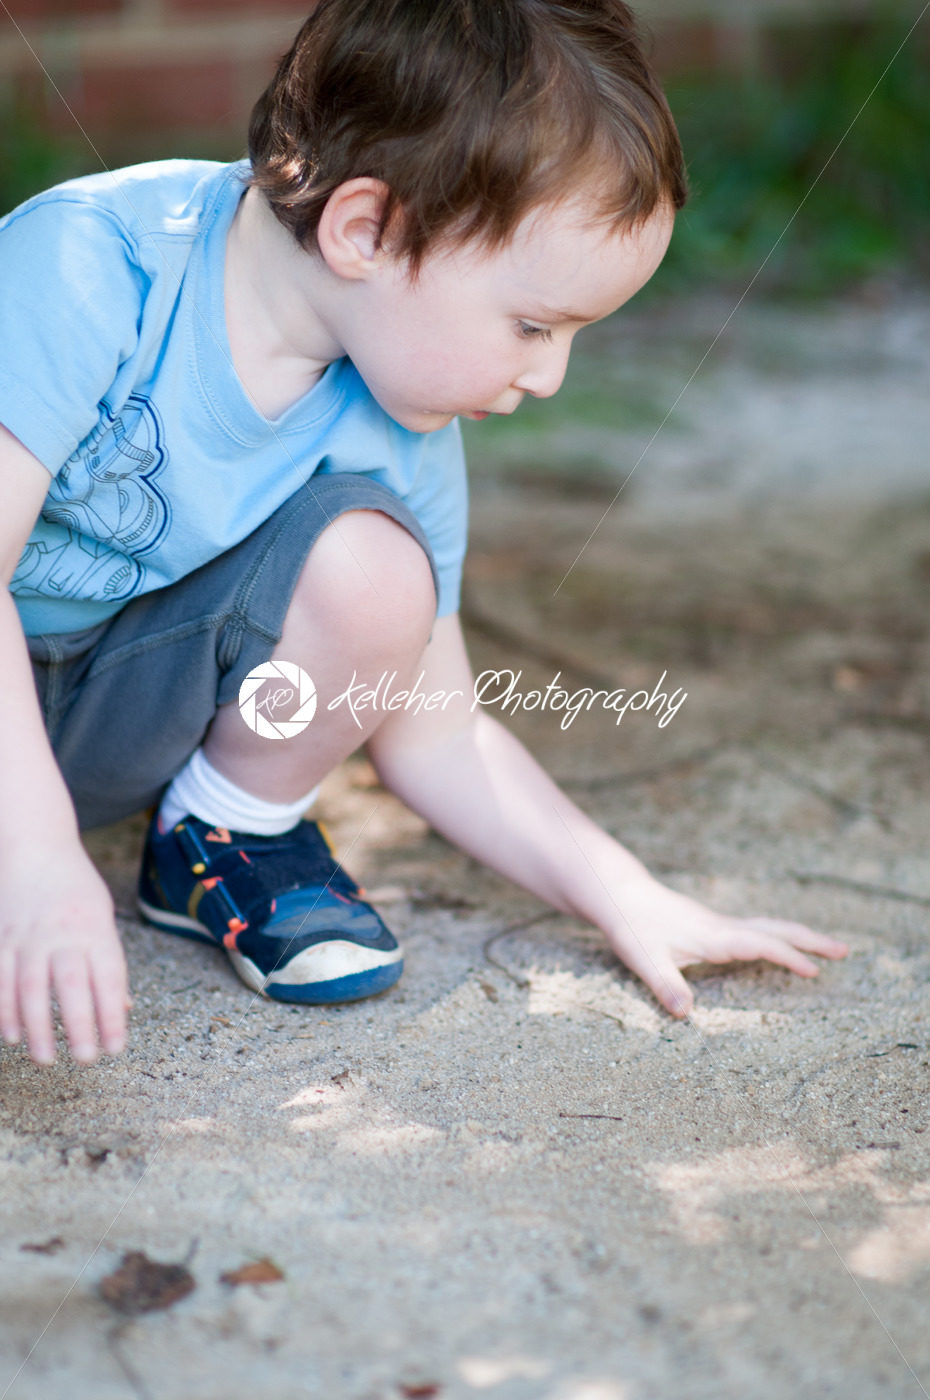 Adorable little boy playing in a sandbox - Kelleher Photography Store